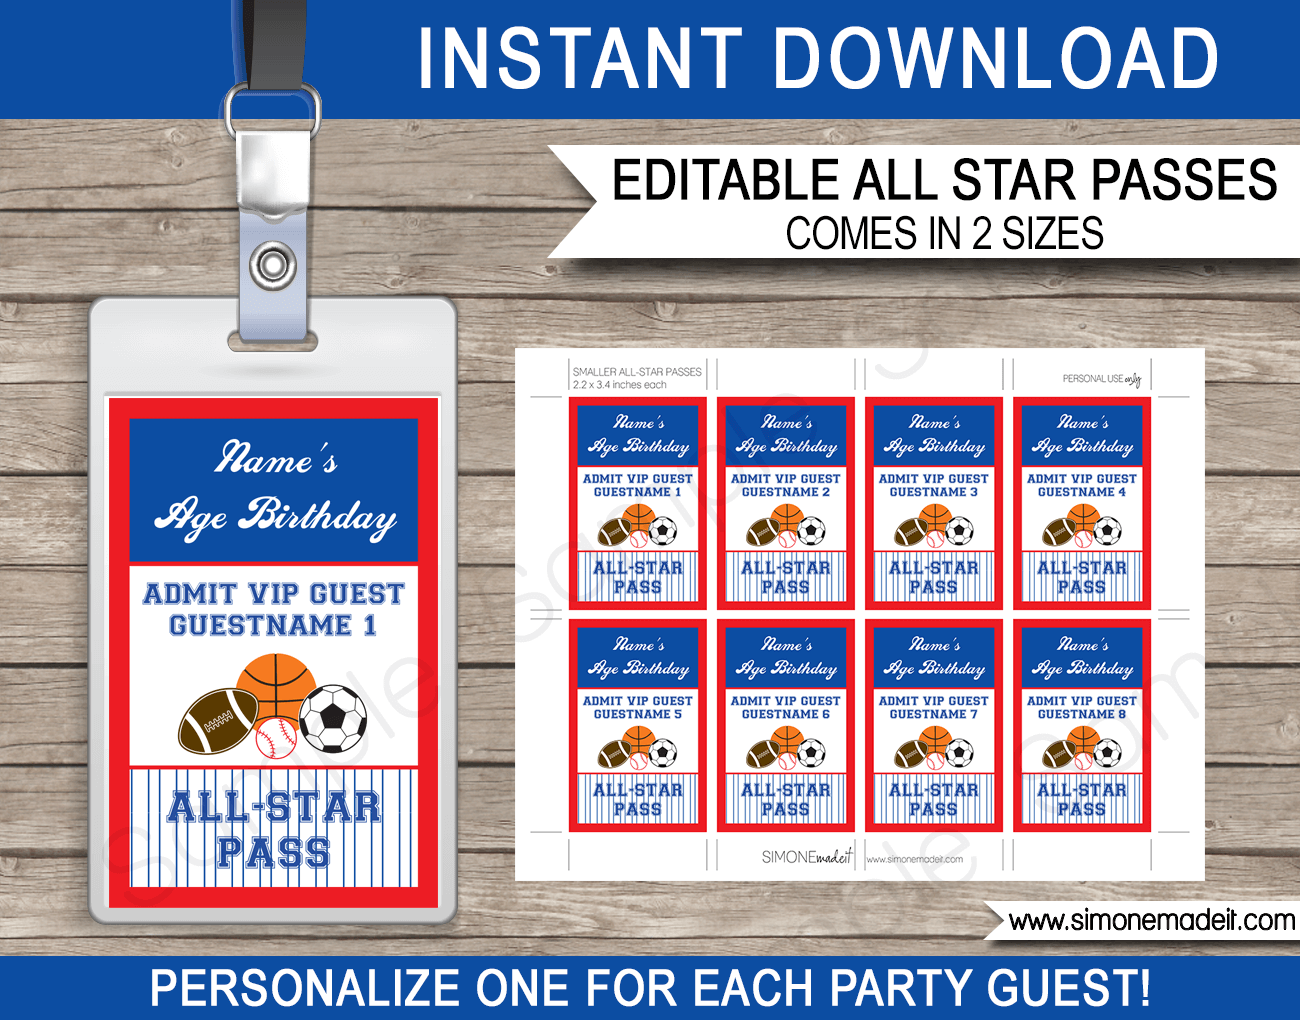 All Star Sports Party VIP Passes | Printable Inserts | Party Favors | Birthday Party | Editable DIY Template | $3.50 INSTANT DOWNLOAD via SIMONEmadeit.com